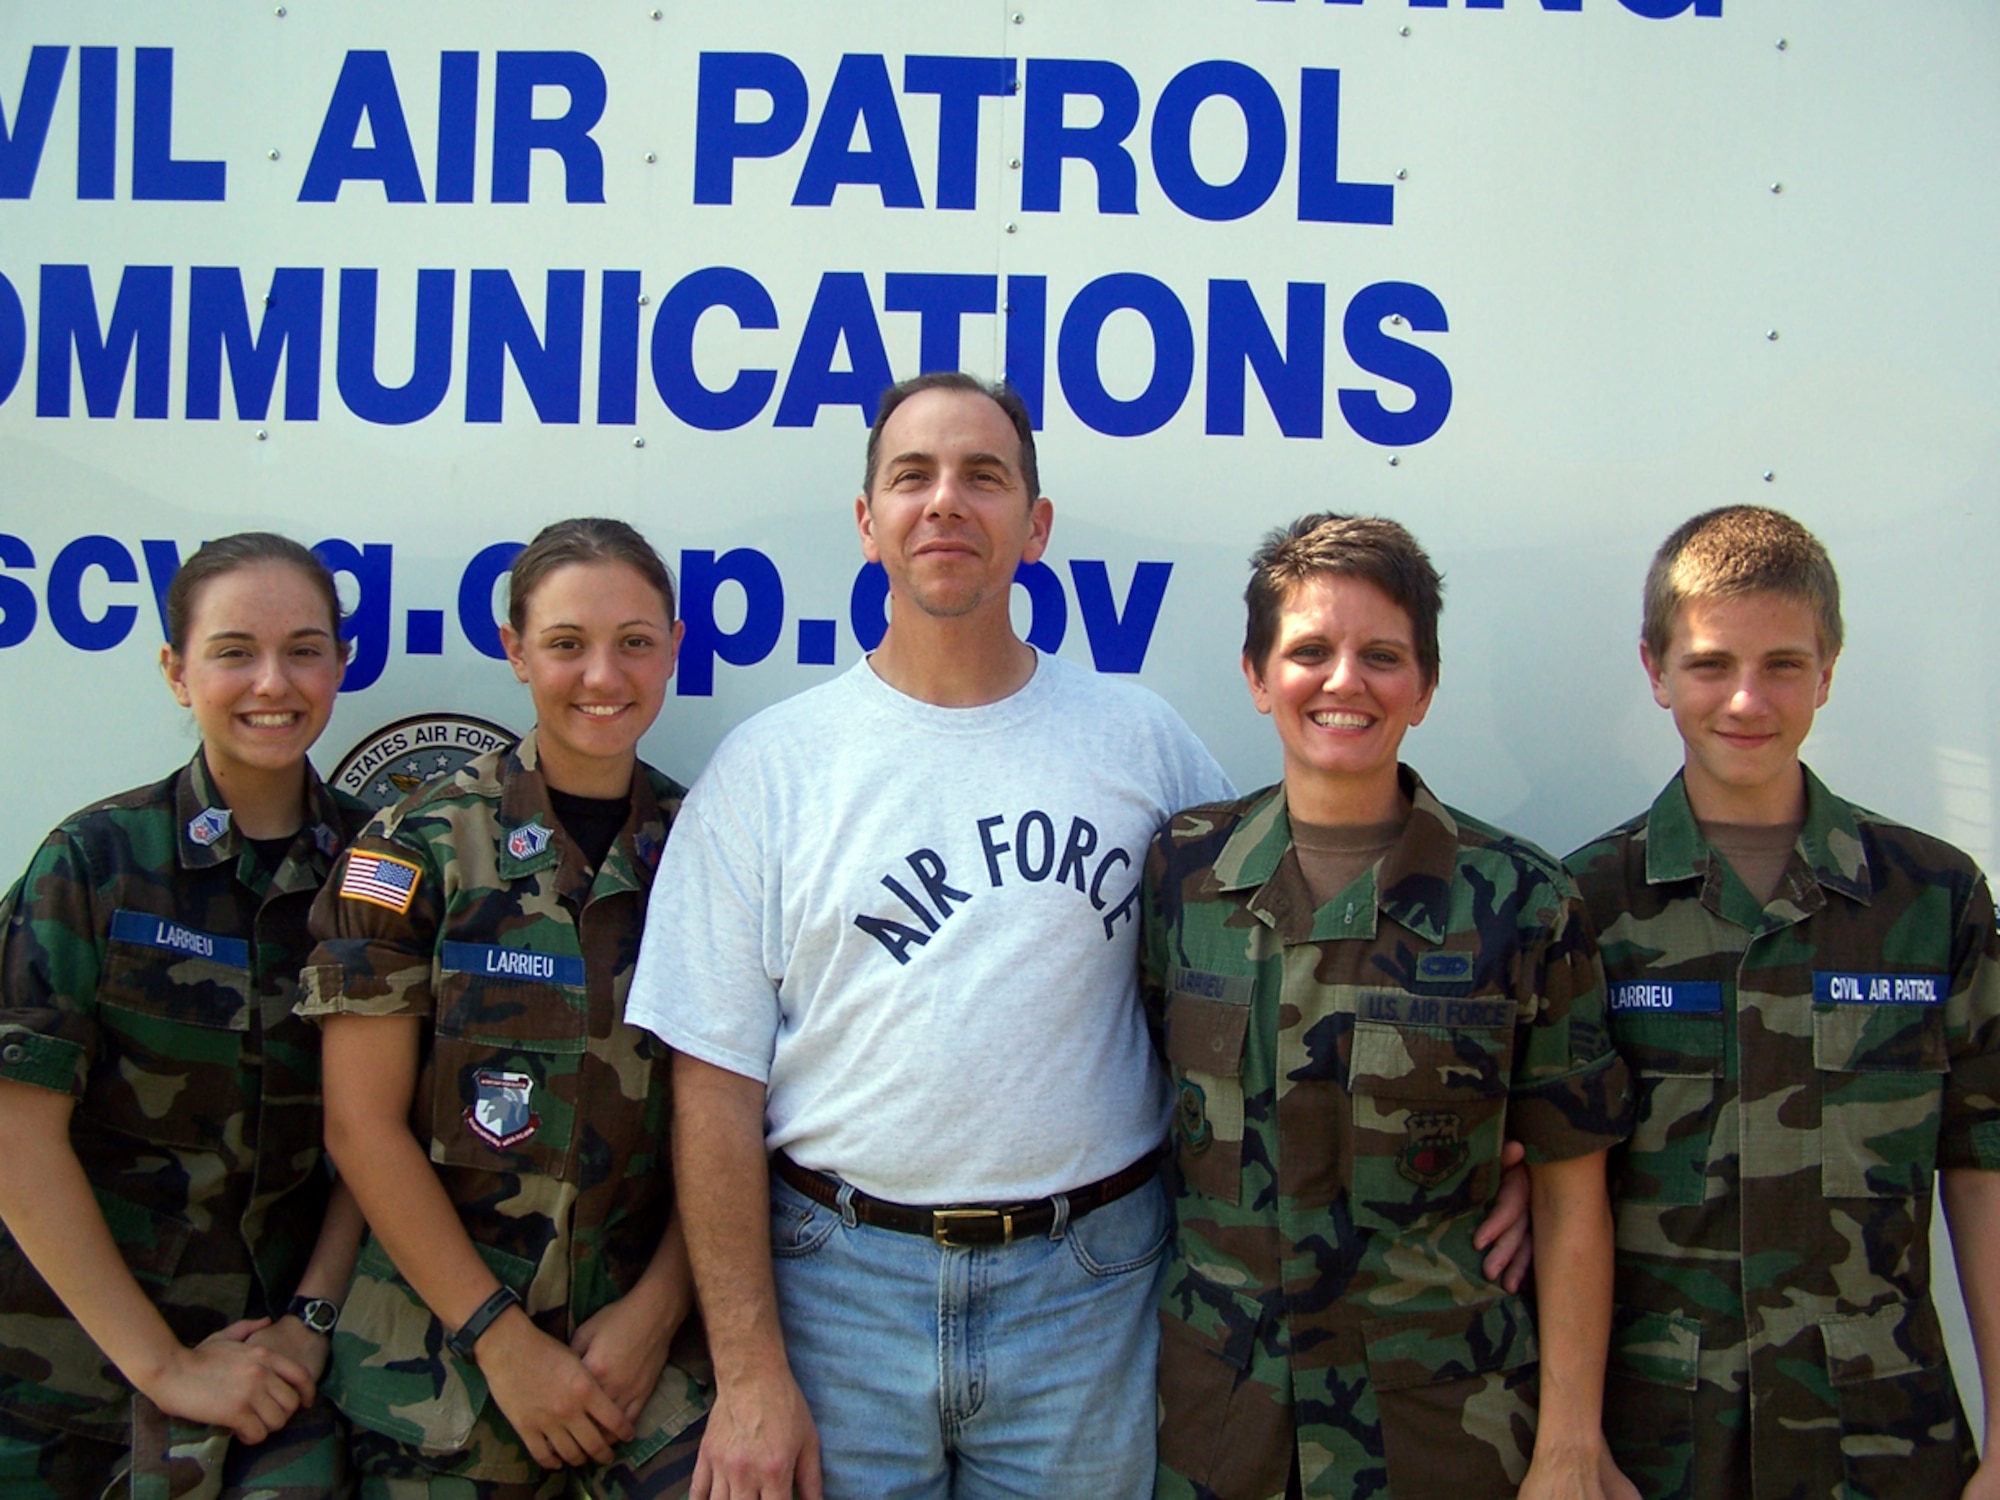 Family business: (left to right) Civil Air Patrol Chief Master Sgt. Mary Cathrine Larrieu, Chief Master Sgt. Sarah Larrieu, Airman 1st Class Conrad Larrieu, 2nd Lt. Dawn Larrieu, and Airman 1st Class Nicholas Larrieu participated in “Encampment 2006.”  Lieutenant Larrieu is also a senior airman with the 81st Aerial Port Squadron. (Photo by Chief Master Sgt. Charlie Hall Jr., USAFR)